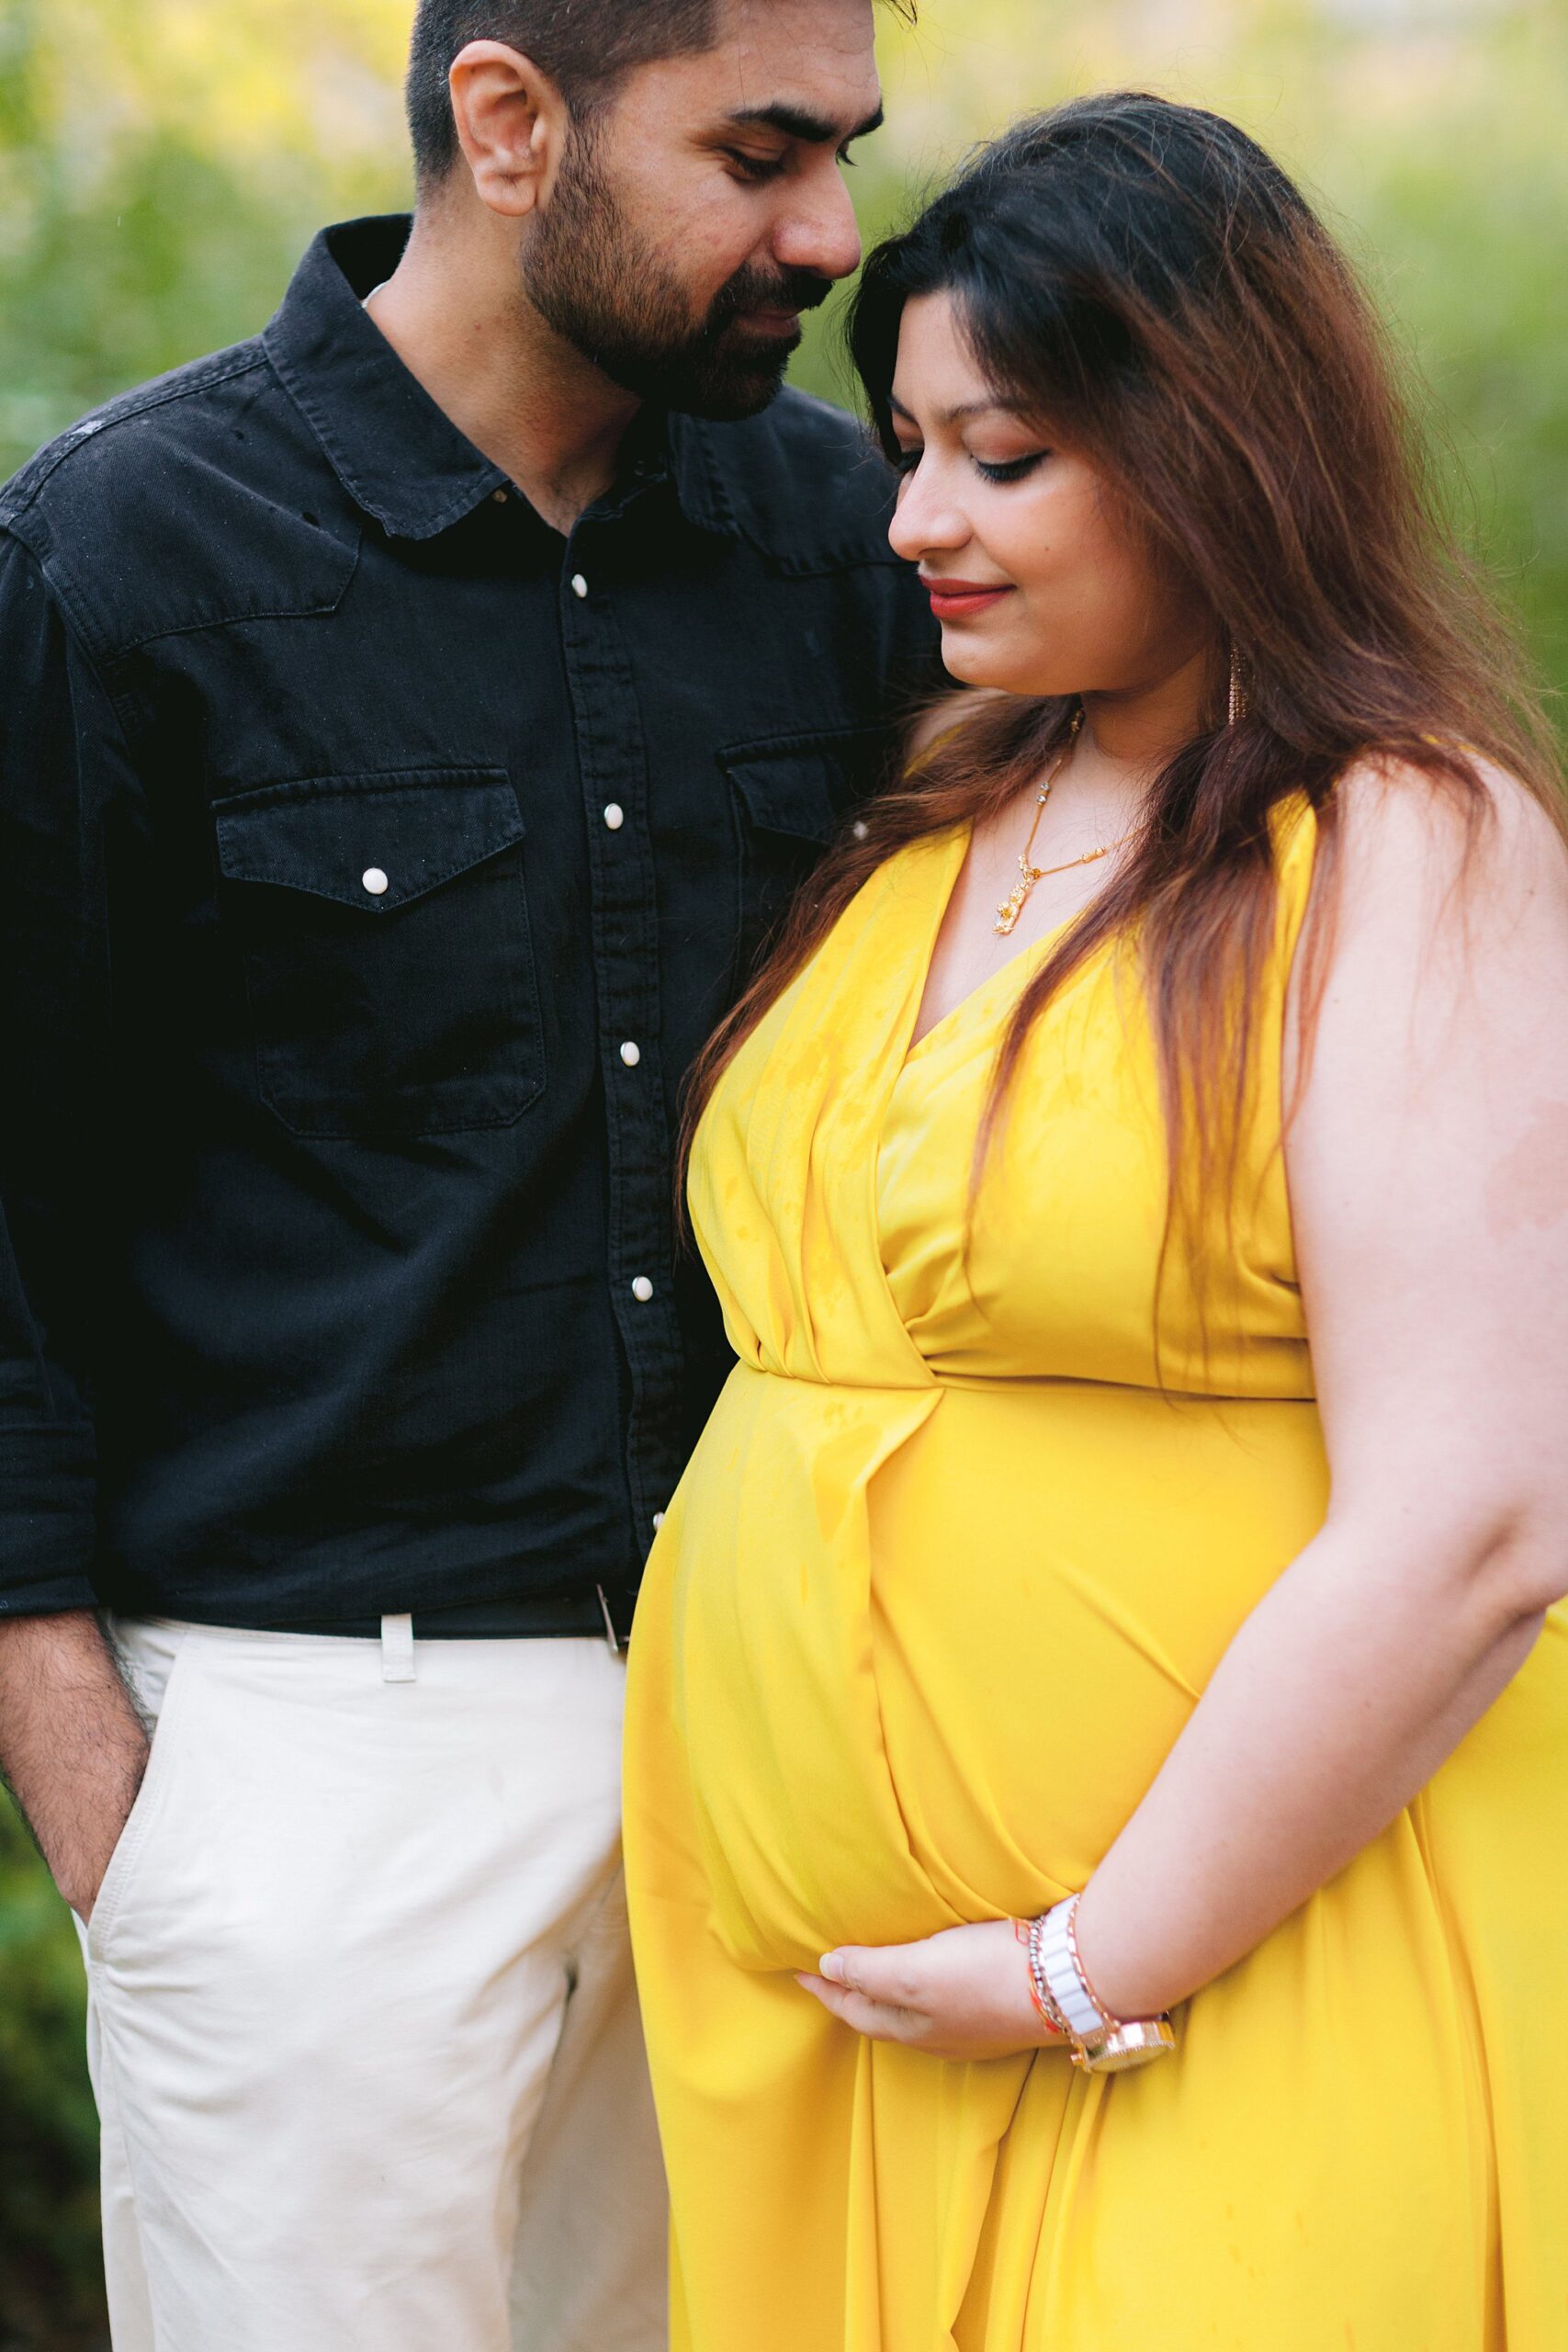 Expectant couple embraces in a romantic maternity photoshoot in Montreal's Old Port.